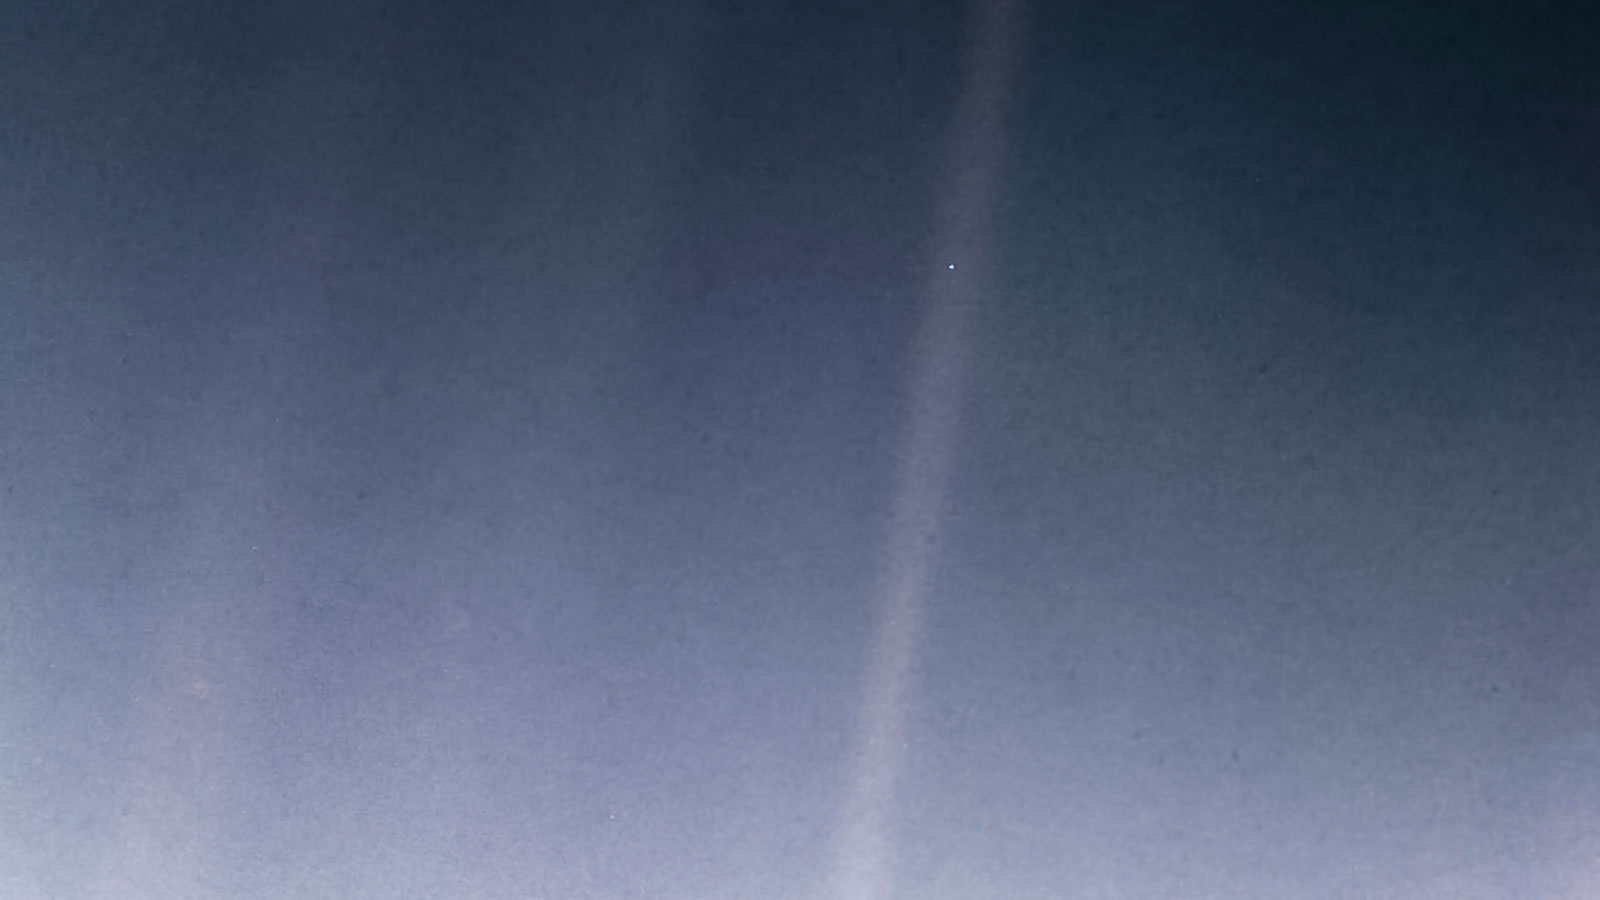 Pale blue dot: Voyager 1 signal from interstellar space photographed